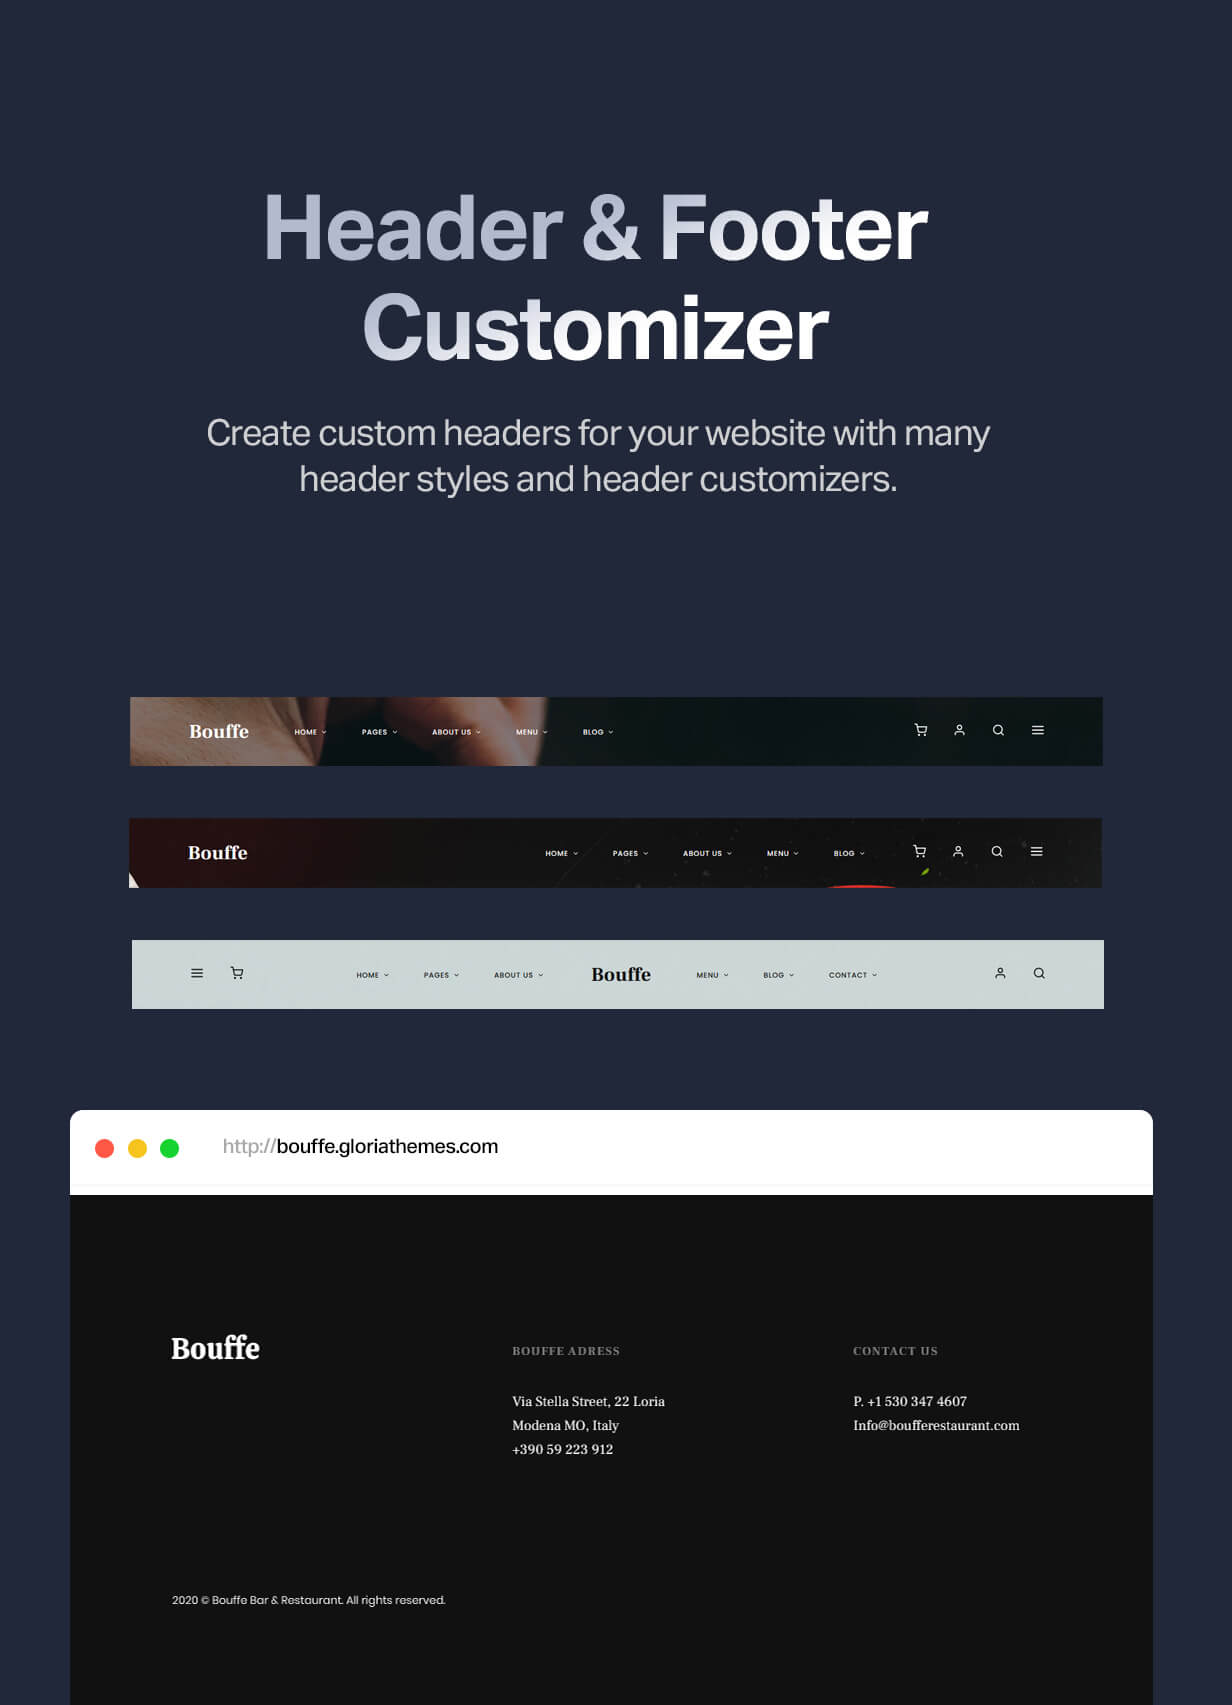 Header and footer customizer